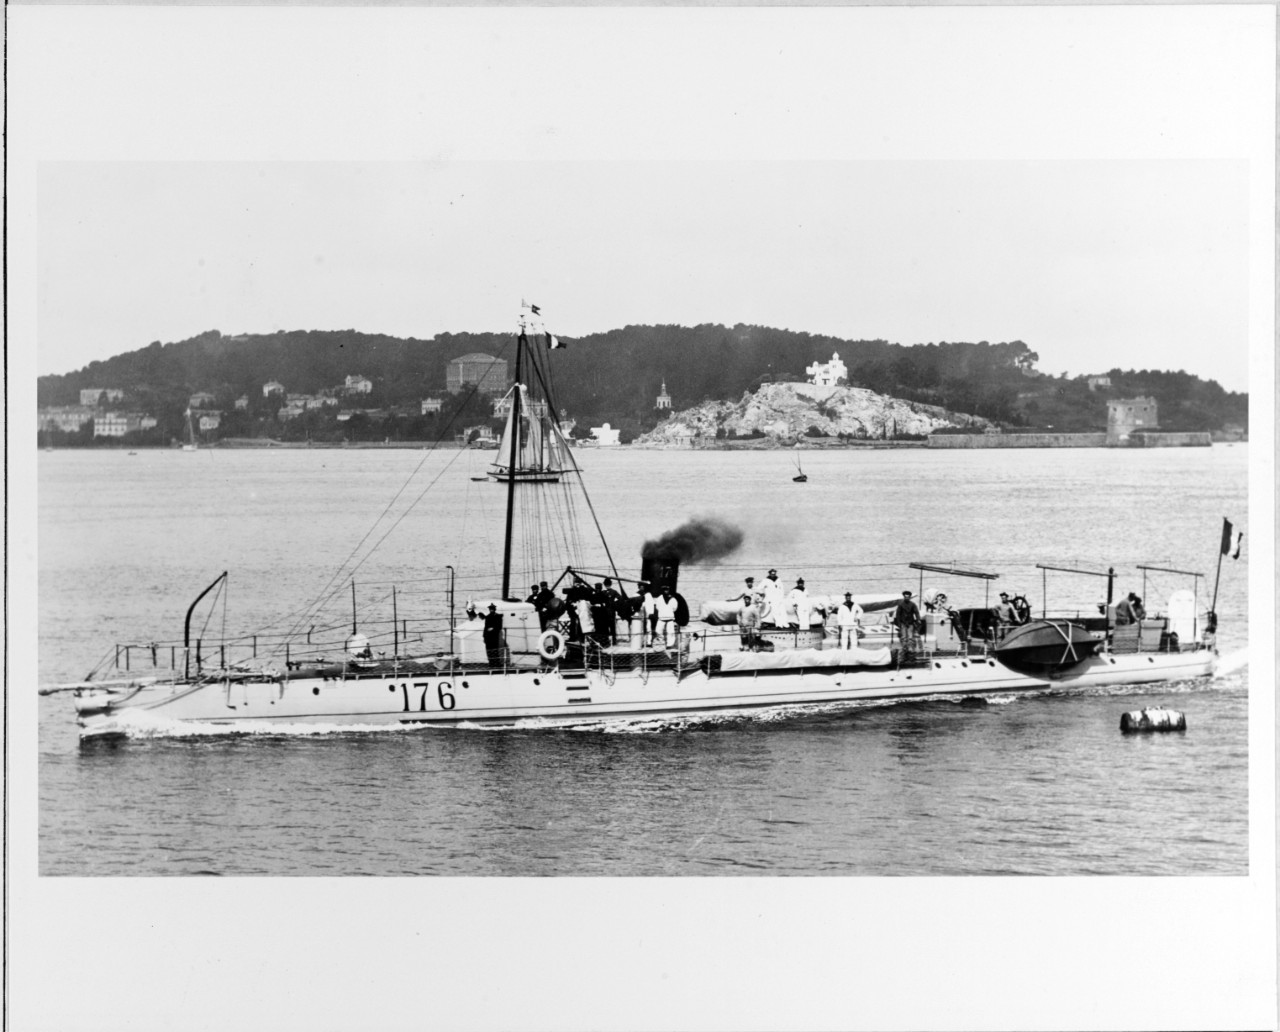 TORPILLEUR 176 (French Torpedo Boat, 1893)